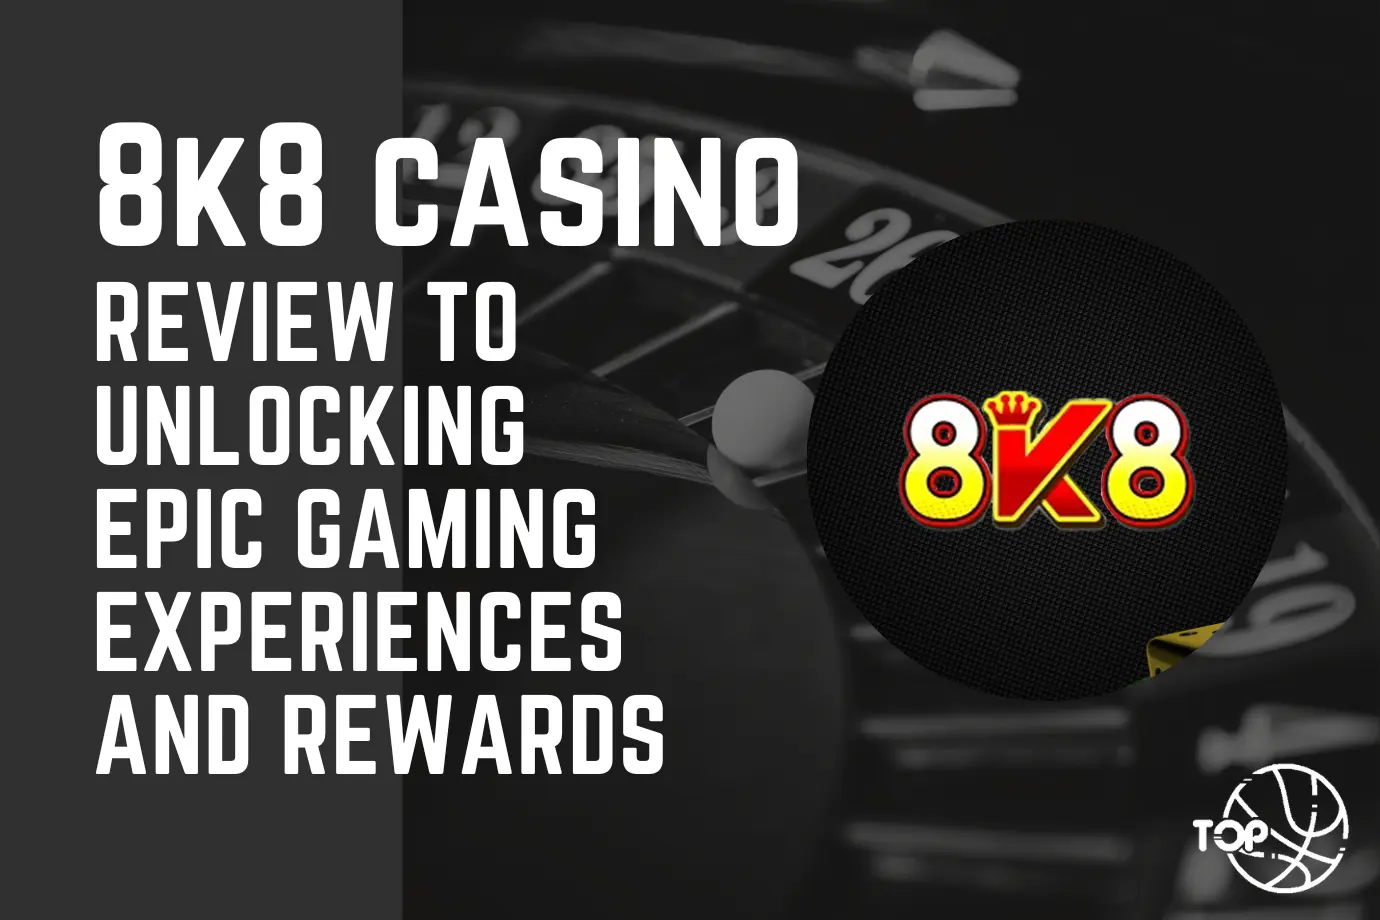 8k8: Casino Review to Unlocking Epic Gaming Experiences and Rewards